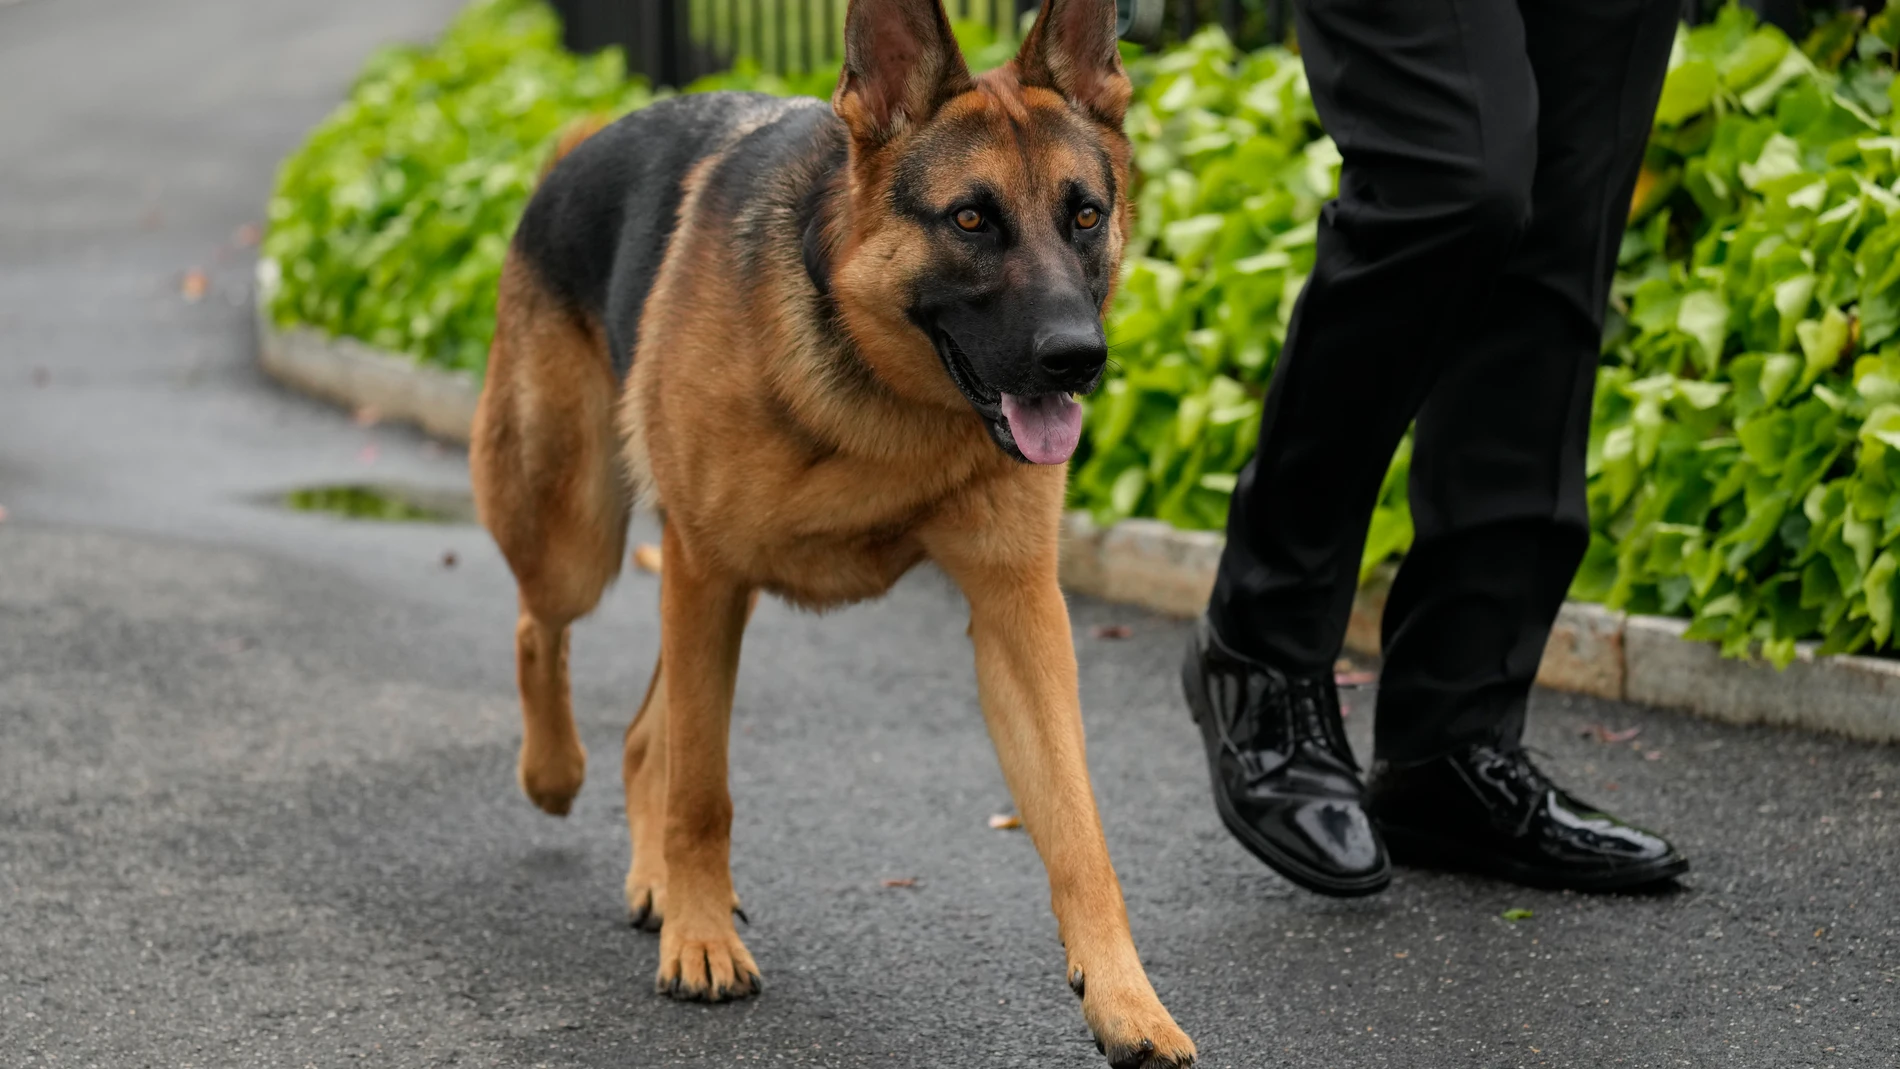 FILE - President Joe Biden's dog Commander, a German shepherd, is walked outside the West Wing of the White House in Washington, April 29, 2023. Commander has bitten another U.S. Secret Service employee. A uniformed division officer was bitten by the dog around 8 p.m. Monday, Sept. 25, at the White House, and was treated on-site by medical personnel, said USSS chief of communications Anthony Guglielmi. The officer is doing just fine, he said. (AP Photo/Carolyn Kaster, File)